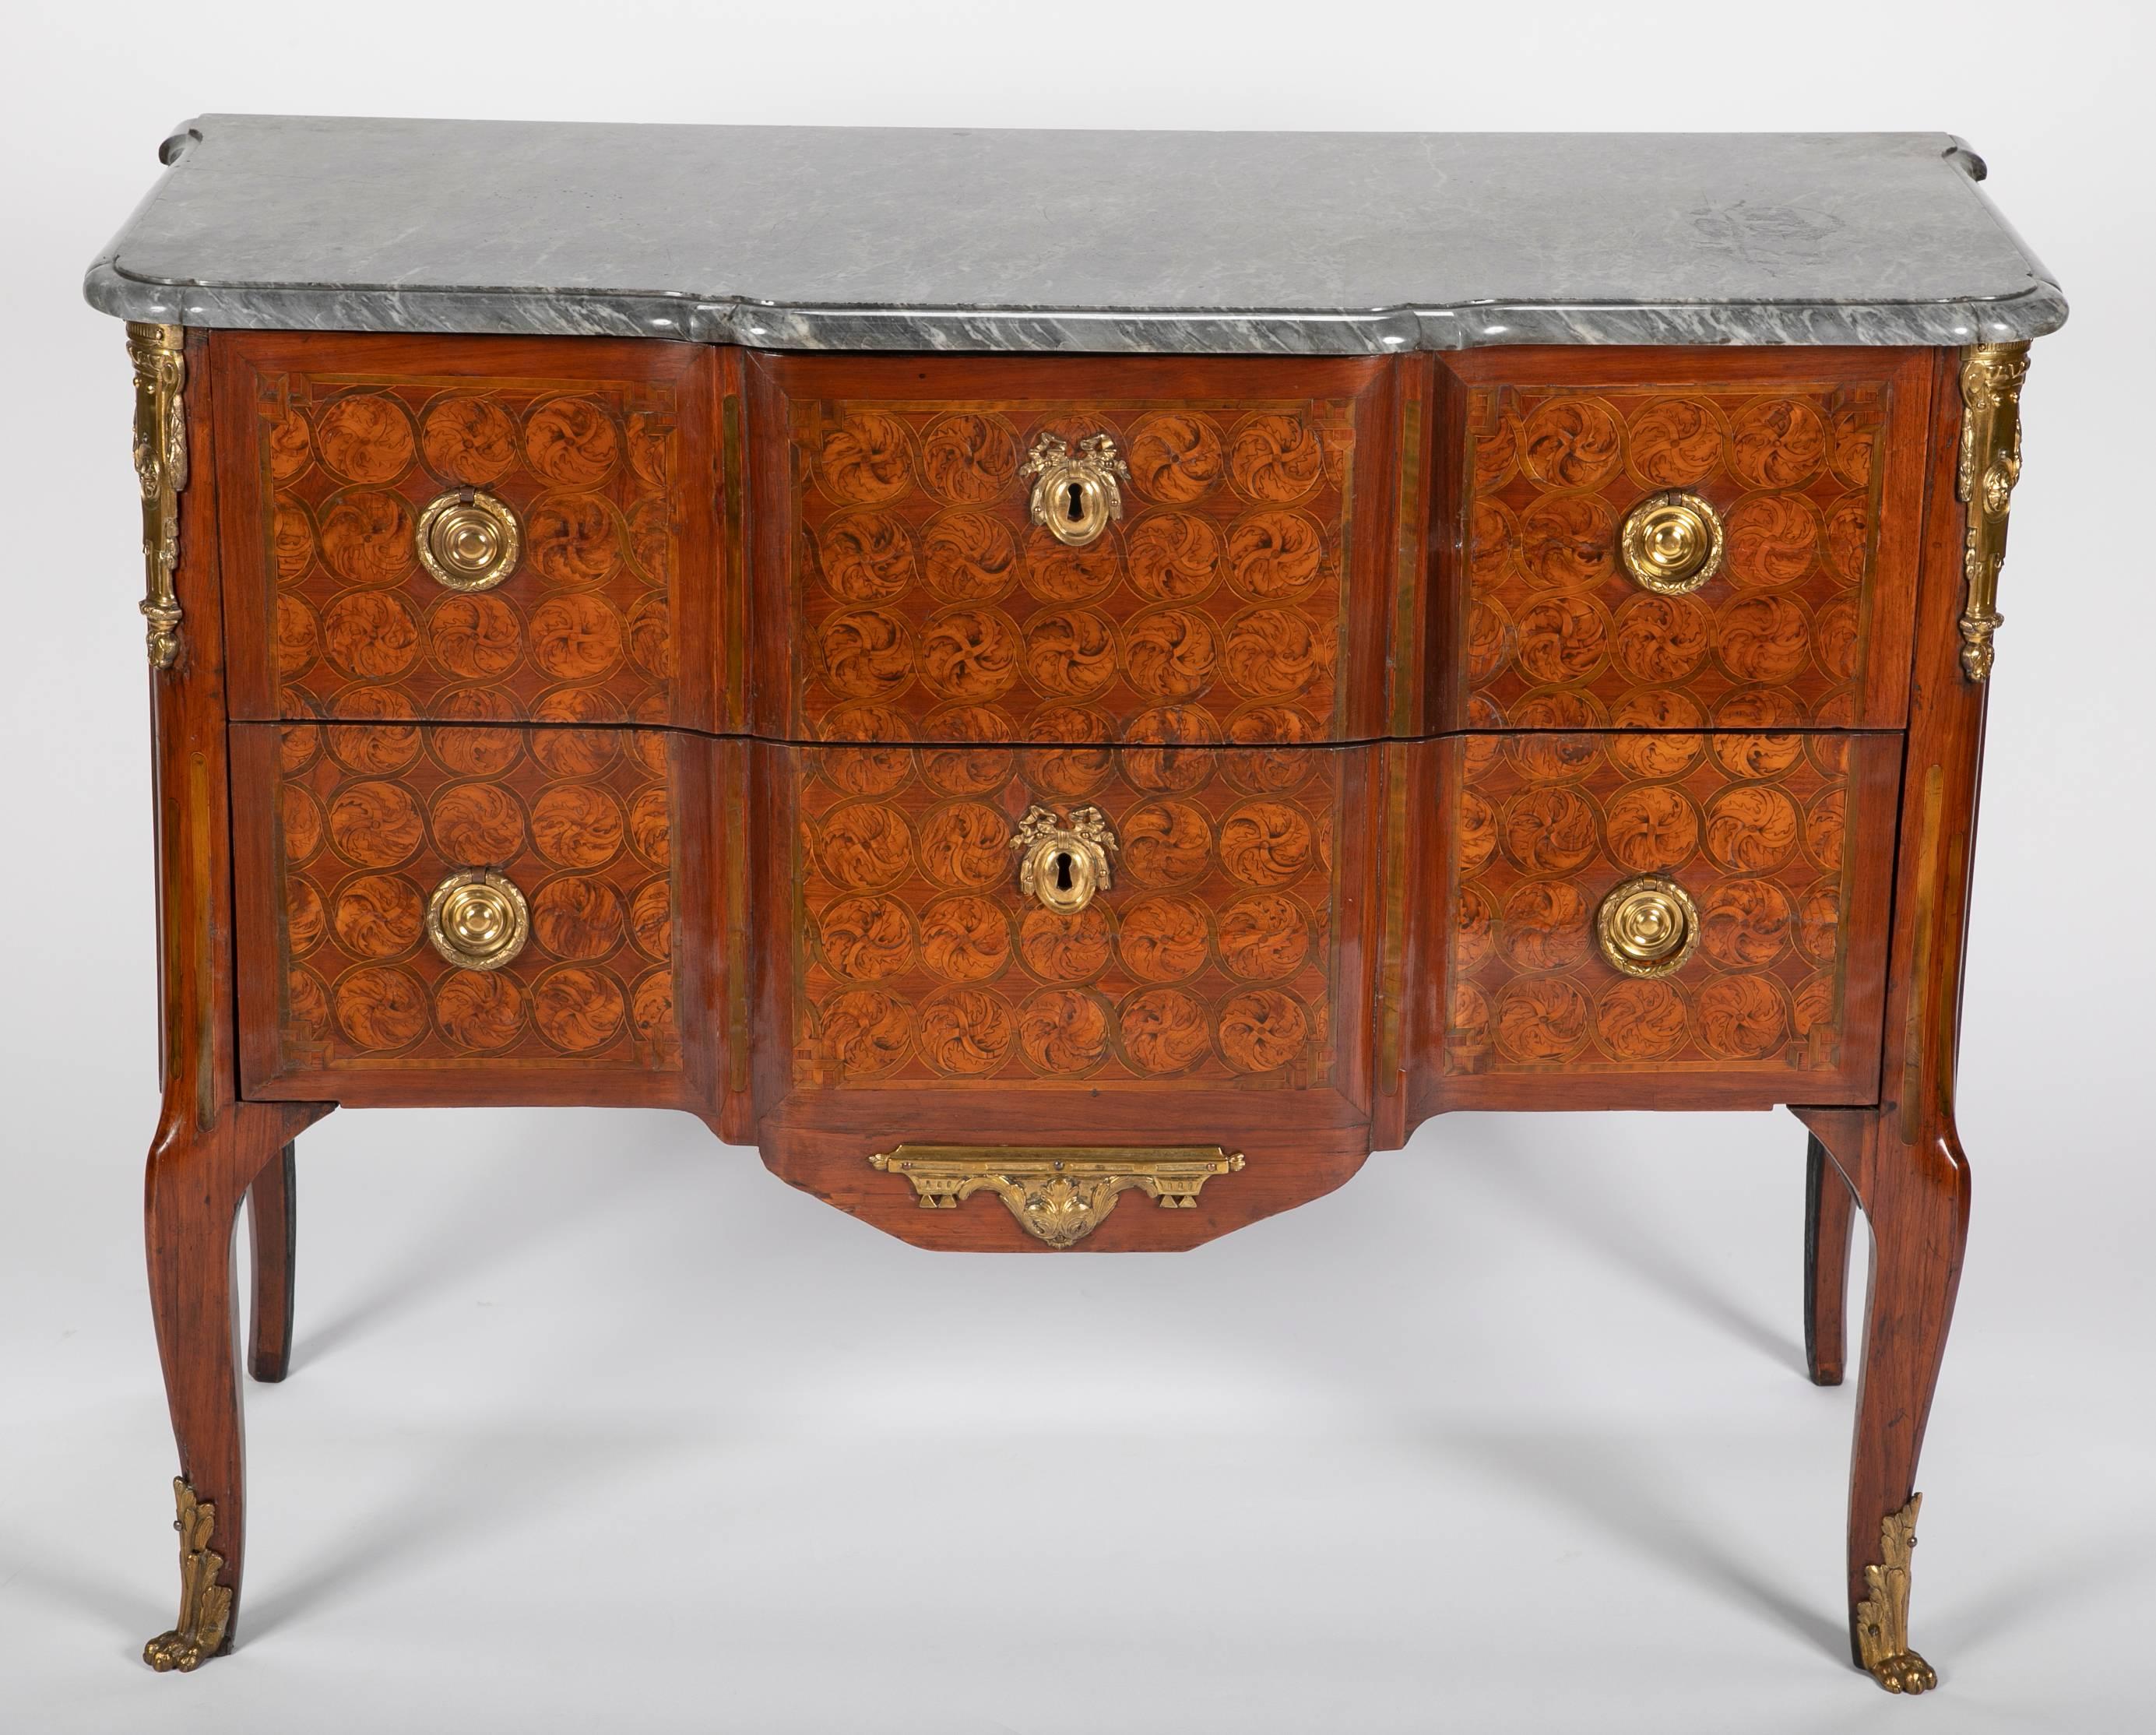 A French Transitional period commode of exceptional quality in tulipwood and amaranth inlaid with concentric circles and surmounted with a gray marble top, circa 1760. Ex. Collection: St Louis Art Museum. Measures: 34.5 H x 42.5 W x 21 D.